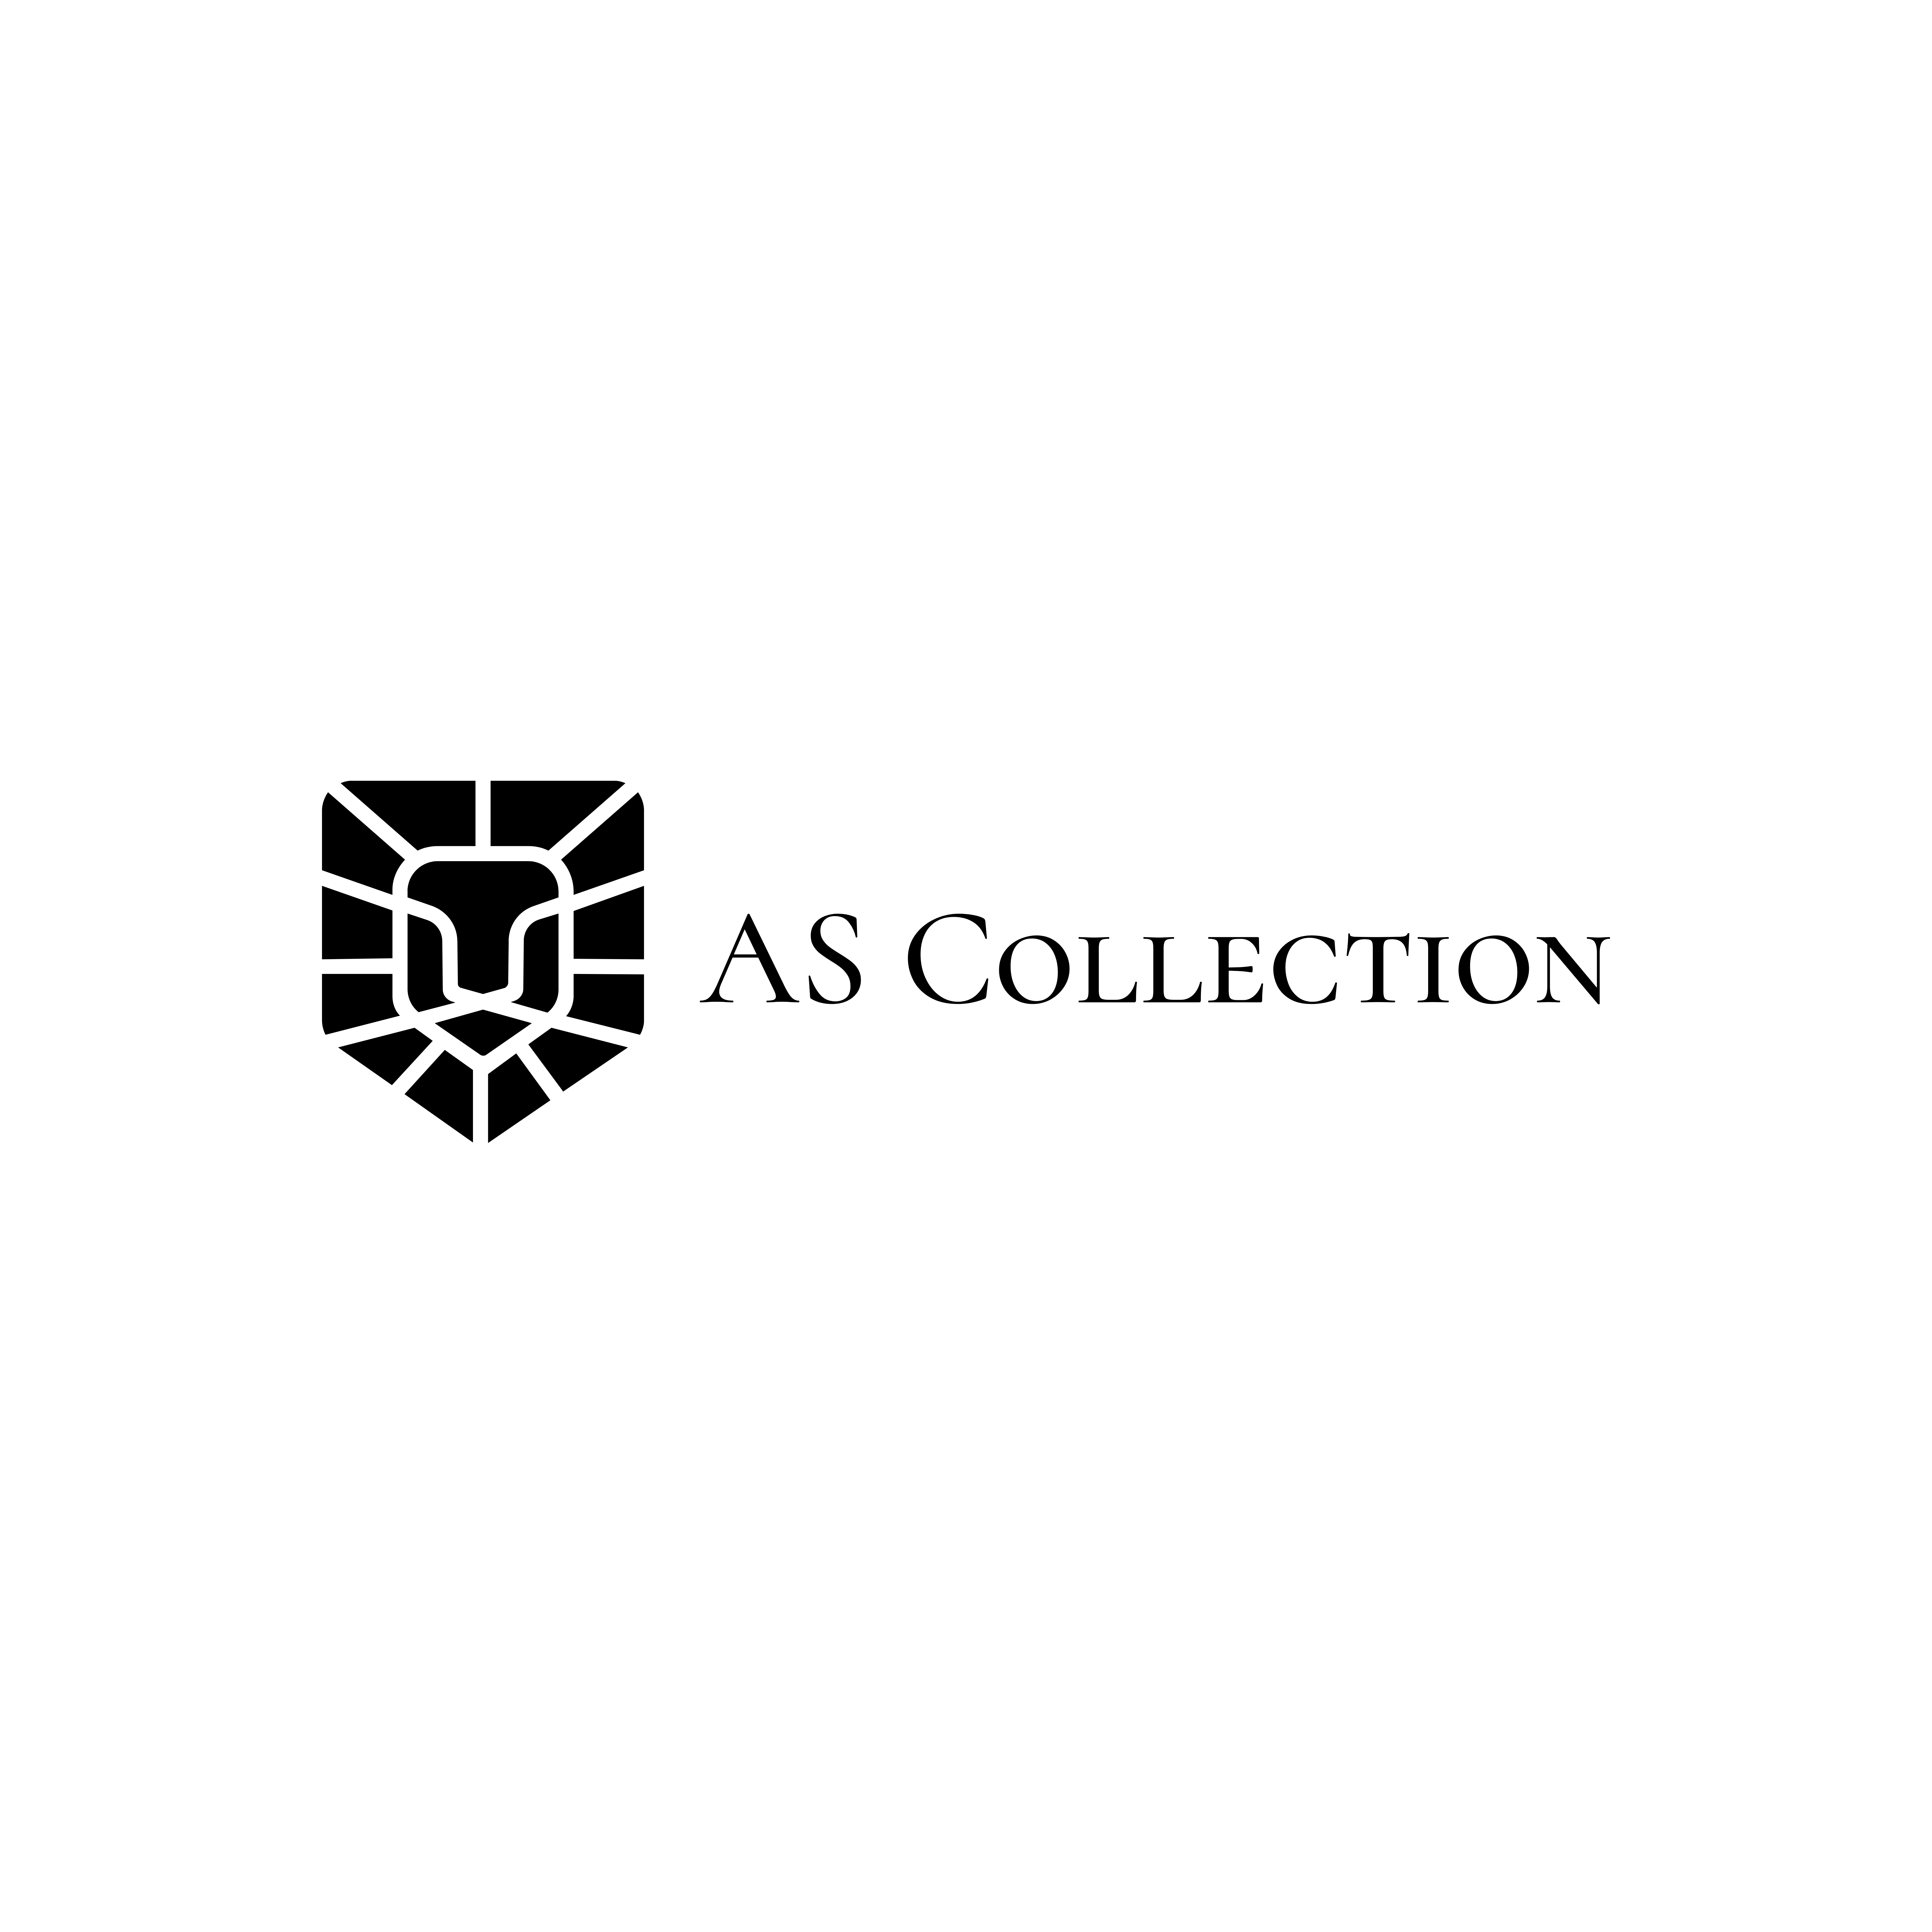 ASCOLLECTION